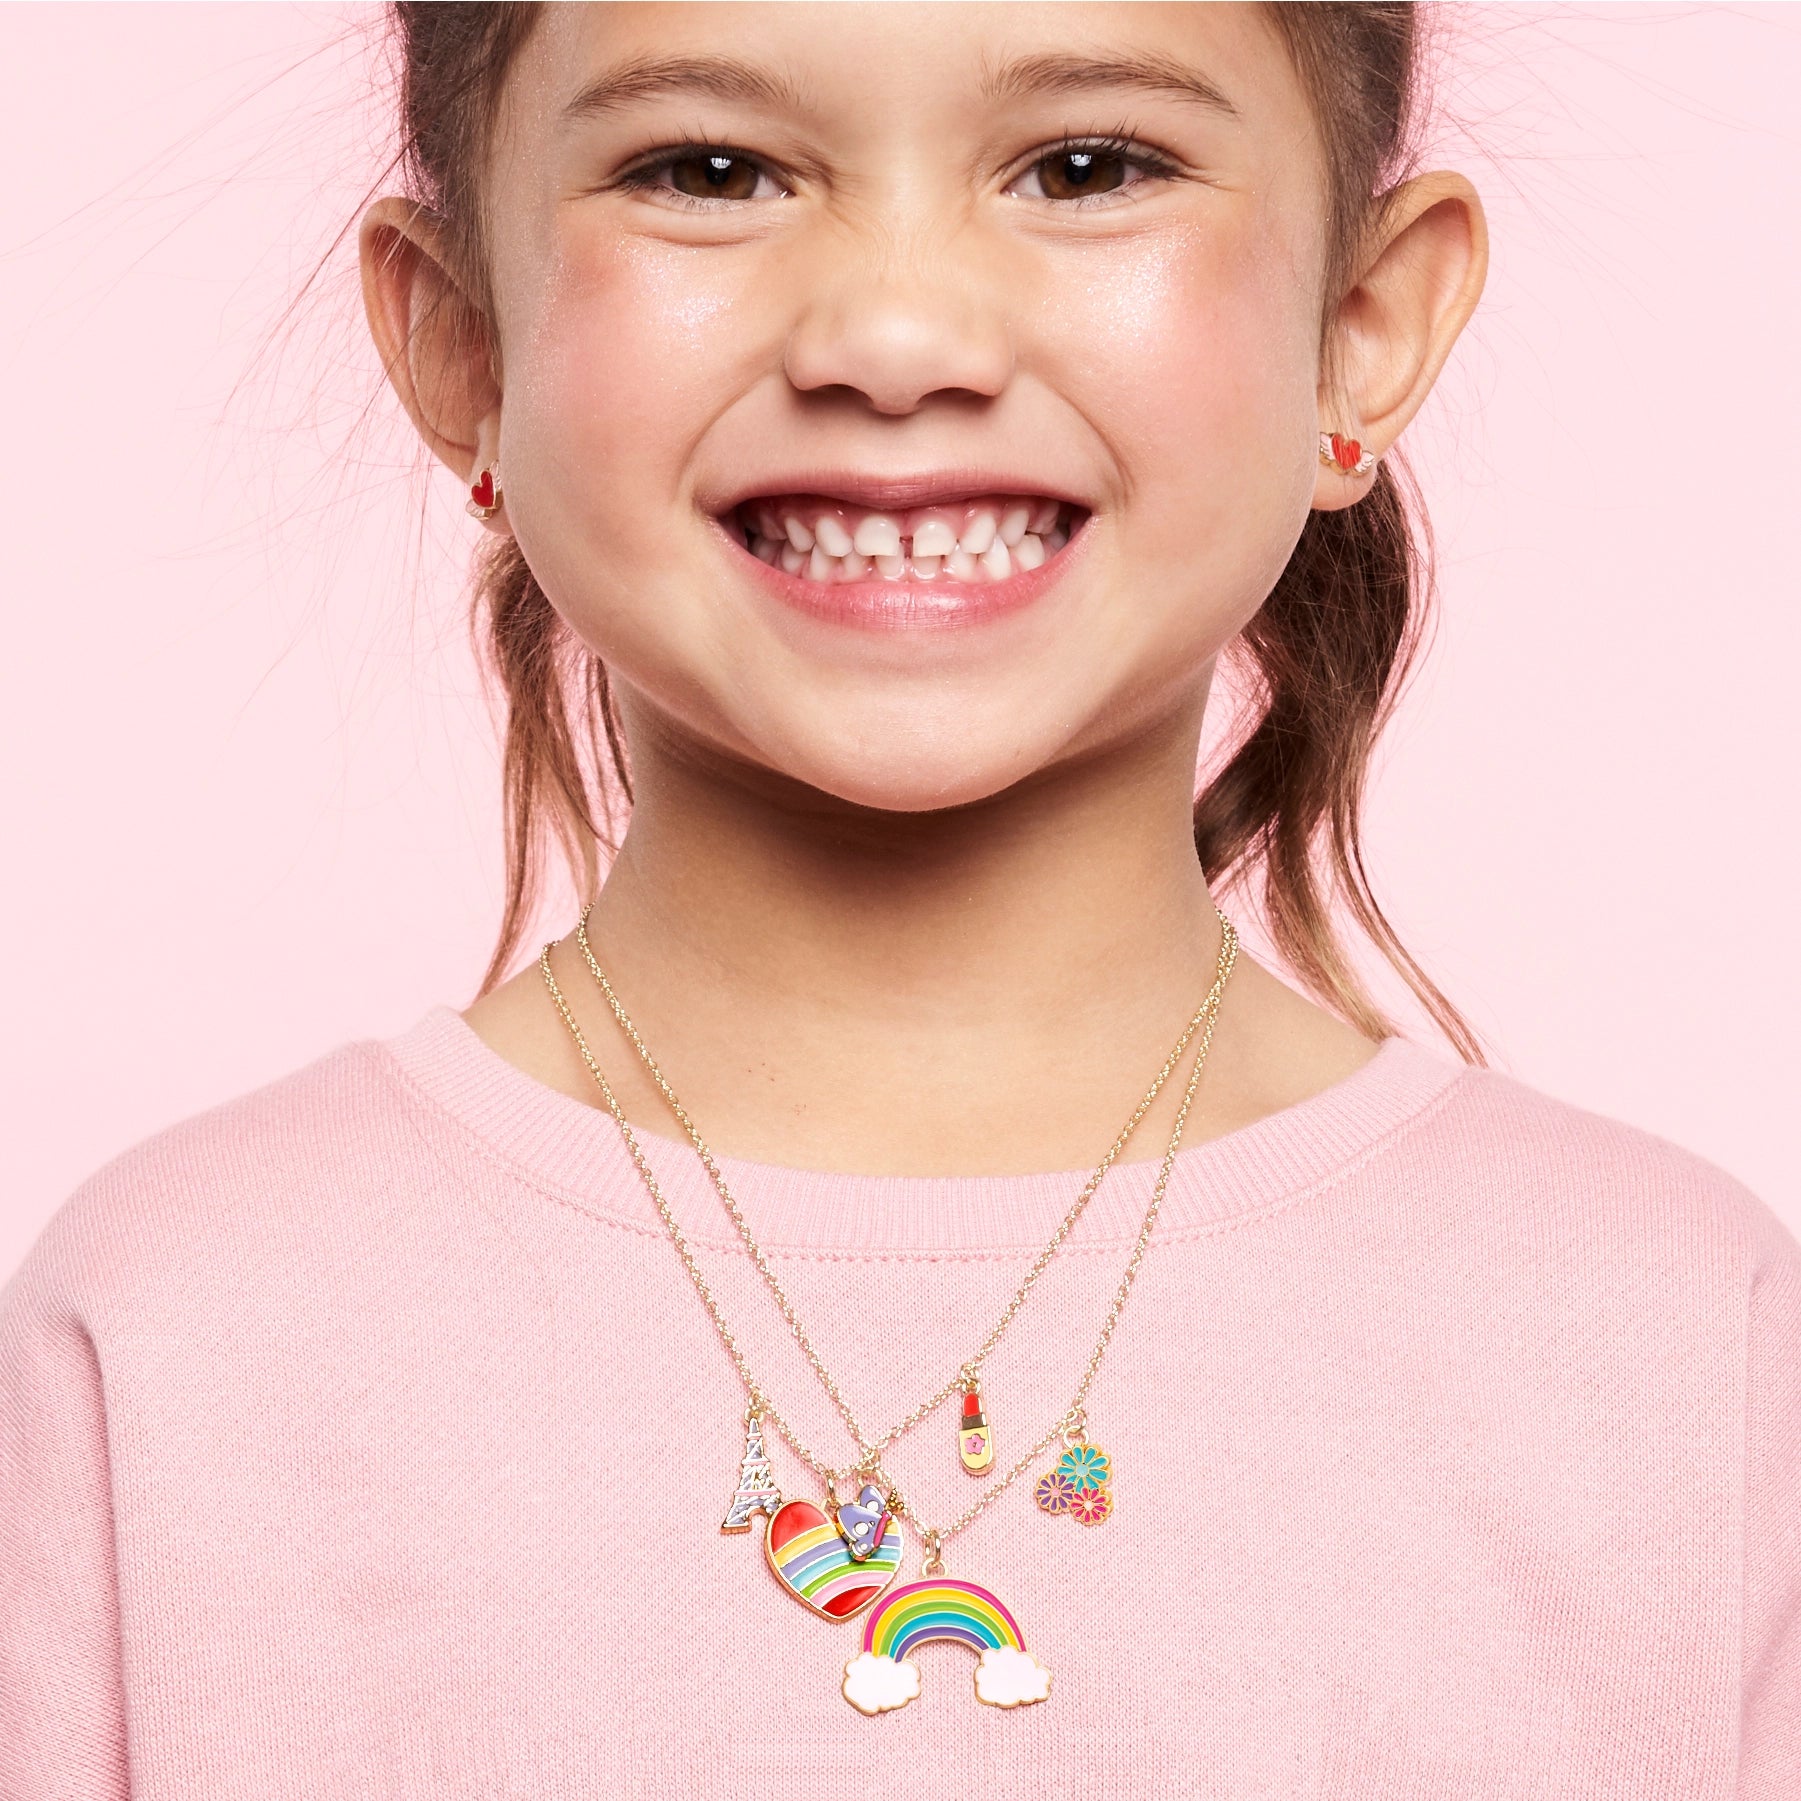 Girl Nation Charming Whimsy Necklace - Cloud Luvs Rainbow